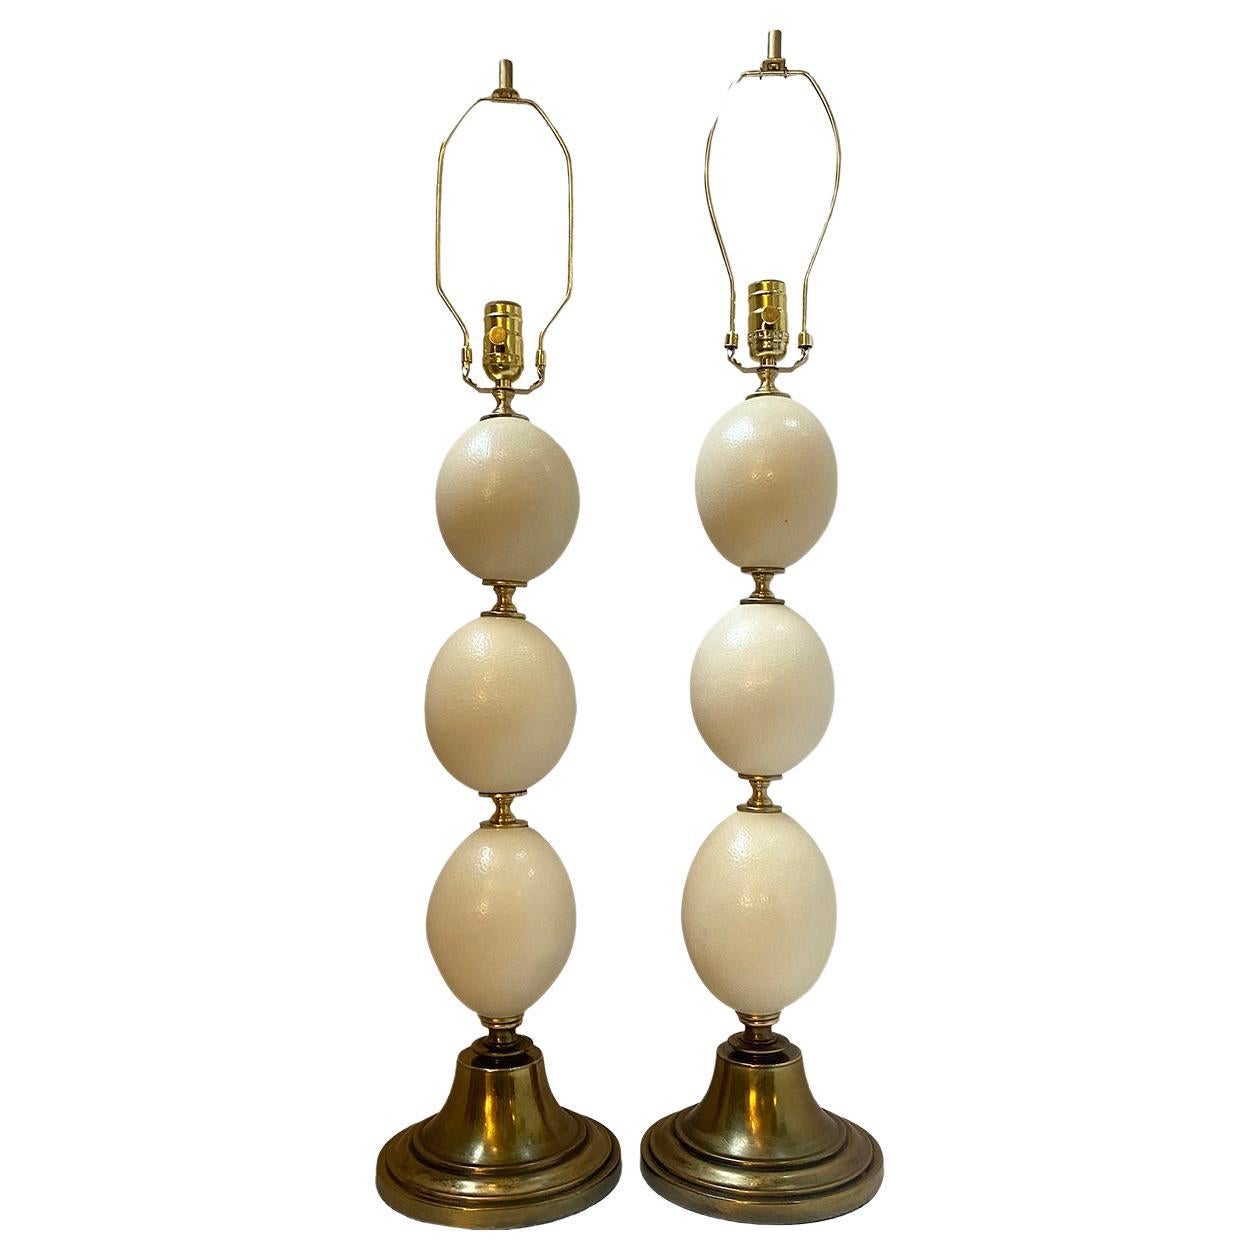 Pair of Midcentury French Ostrich Egg Lamps For Sale